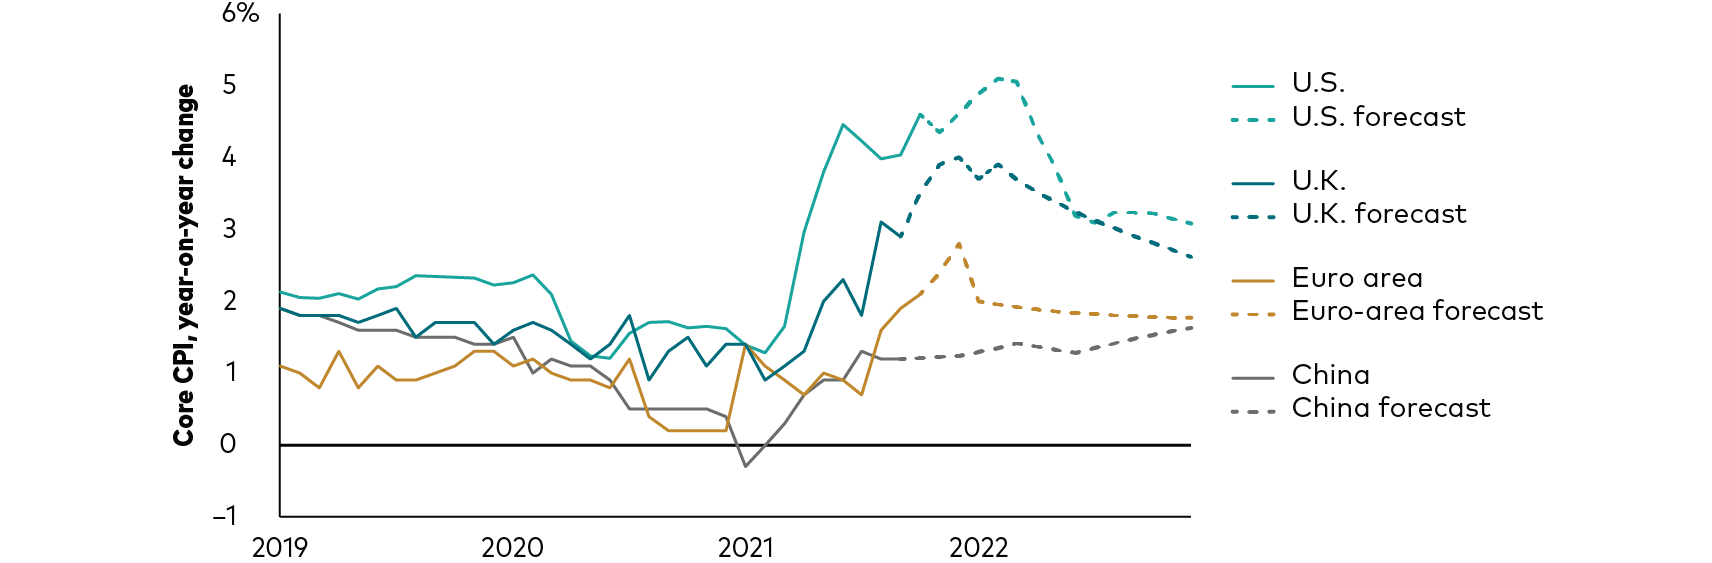 A line graph shows year-over-year changes since 2019 in inflation rates in the U.S., the U.K., the euro area, and China, as well as Vanguard forecasts through 2022. In all four countries or regions, rates were roughly stable in 2019, ranging from about 1% in the euro area to just above 2% in the U.S. Inflation rates then declined in unison in the first half of 2020, and they drifted lower still in the euro area and China in the second half of 2020. In the first three quarters of 2021, inflation rates rose in all four countries or regions, ending a fleeting instance of falling prices in China and spiking to a high above 4% in the U.S. We forecast inflation-rate increases in all four countries or regions relative to the latest reported figures, with peaks of about 5% in the U.S. (at the start of 2022), 4% in the U.K. (at the end of 2021), near 3% in the euro area (also in late 2021), and in the low- to mid-1% range in China throughout 2022.